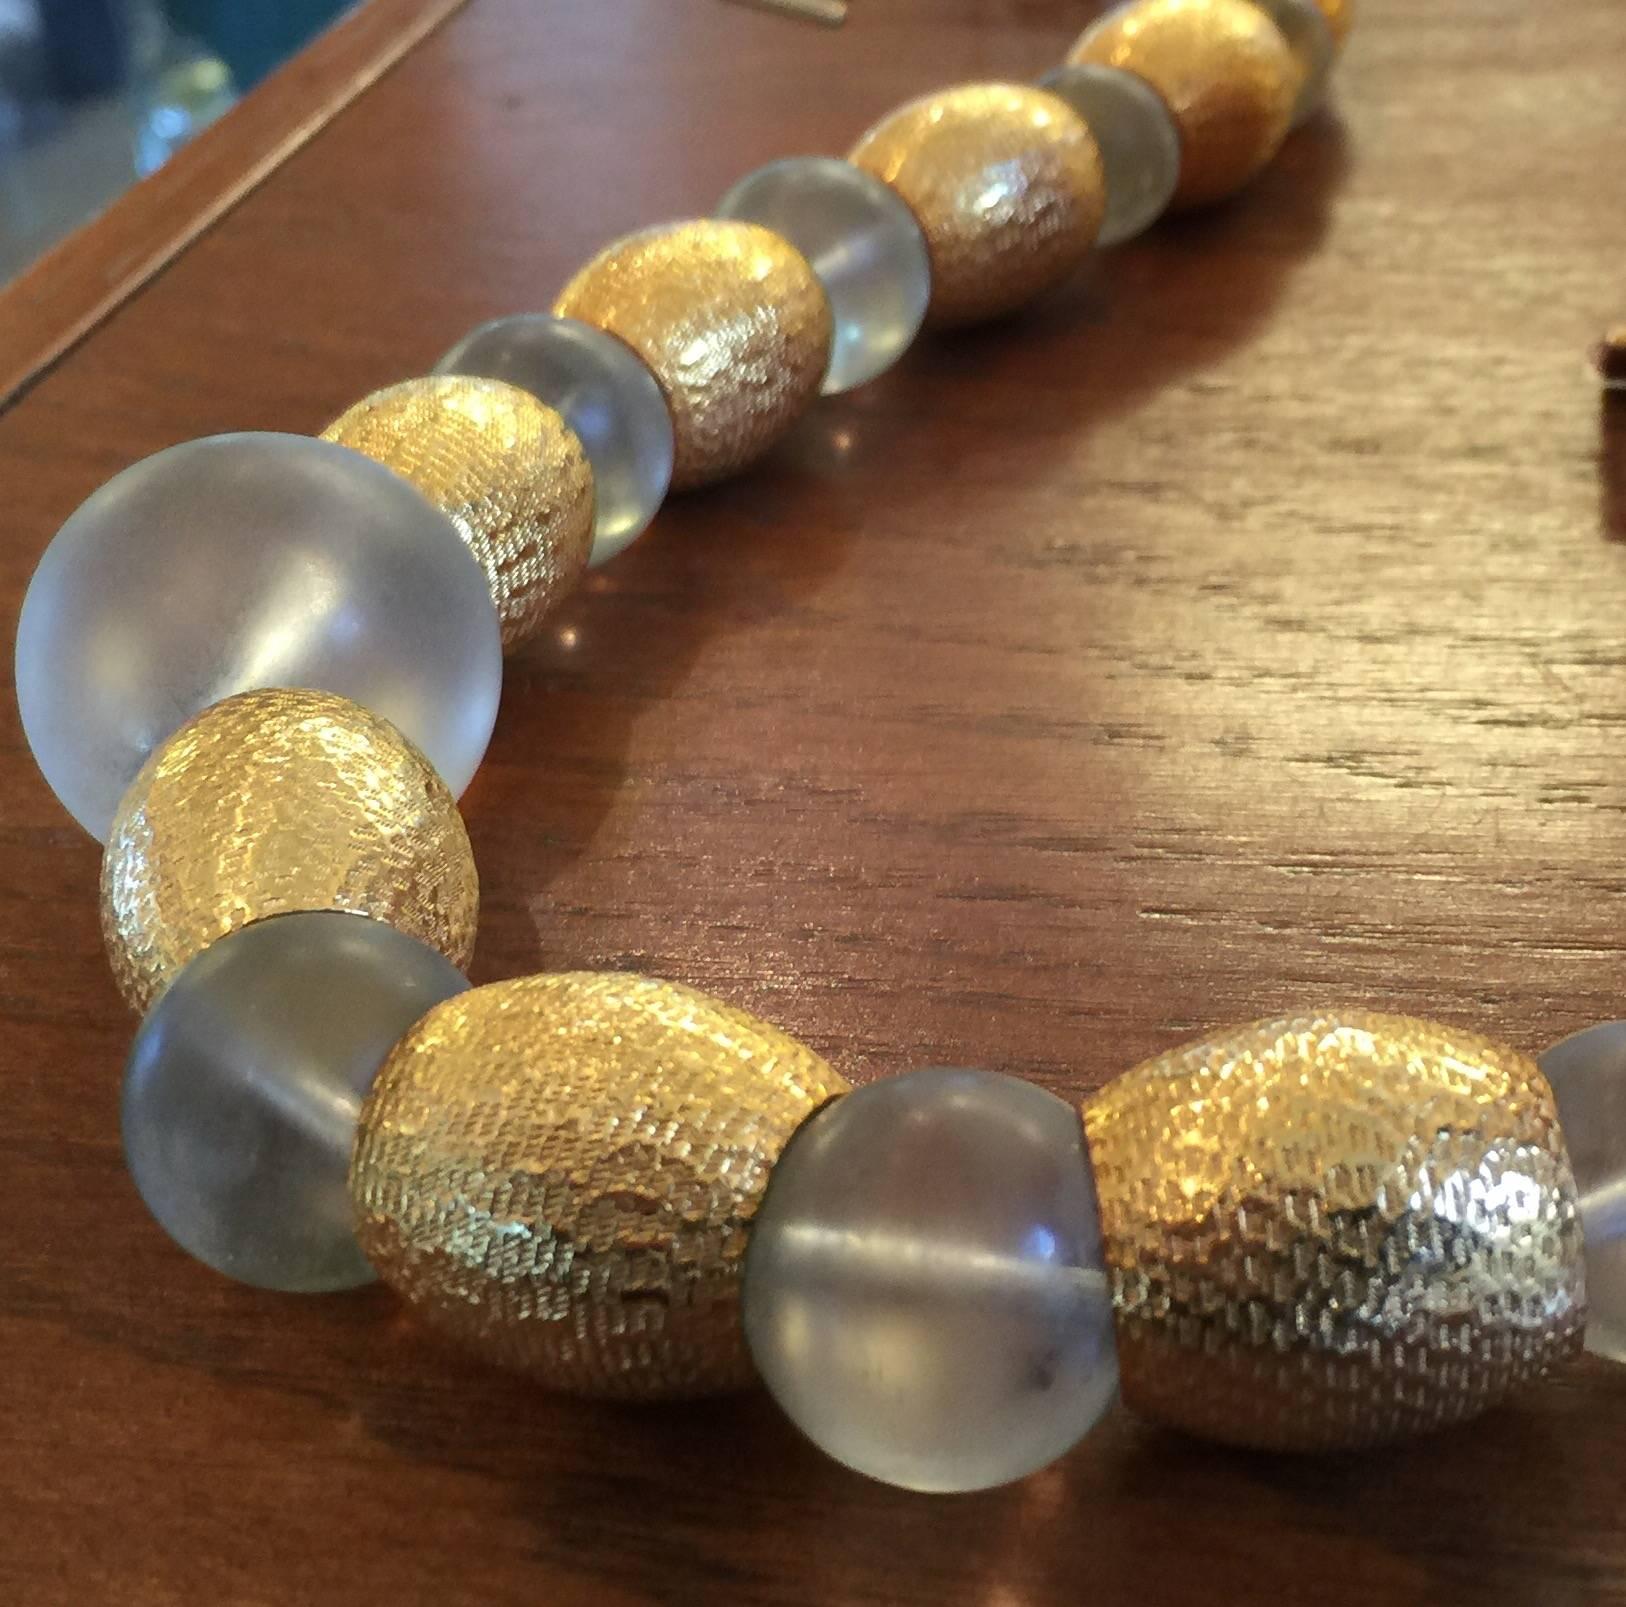 This wonderful 1970's necklace singed by master designer PIERRE CARDIN is both glamorous and modernist in tone, Graduated frosted acrylic spheres and flattened spheres alternate with hammered graduated goldtone barrell shaped beads to create a